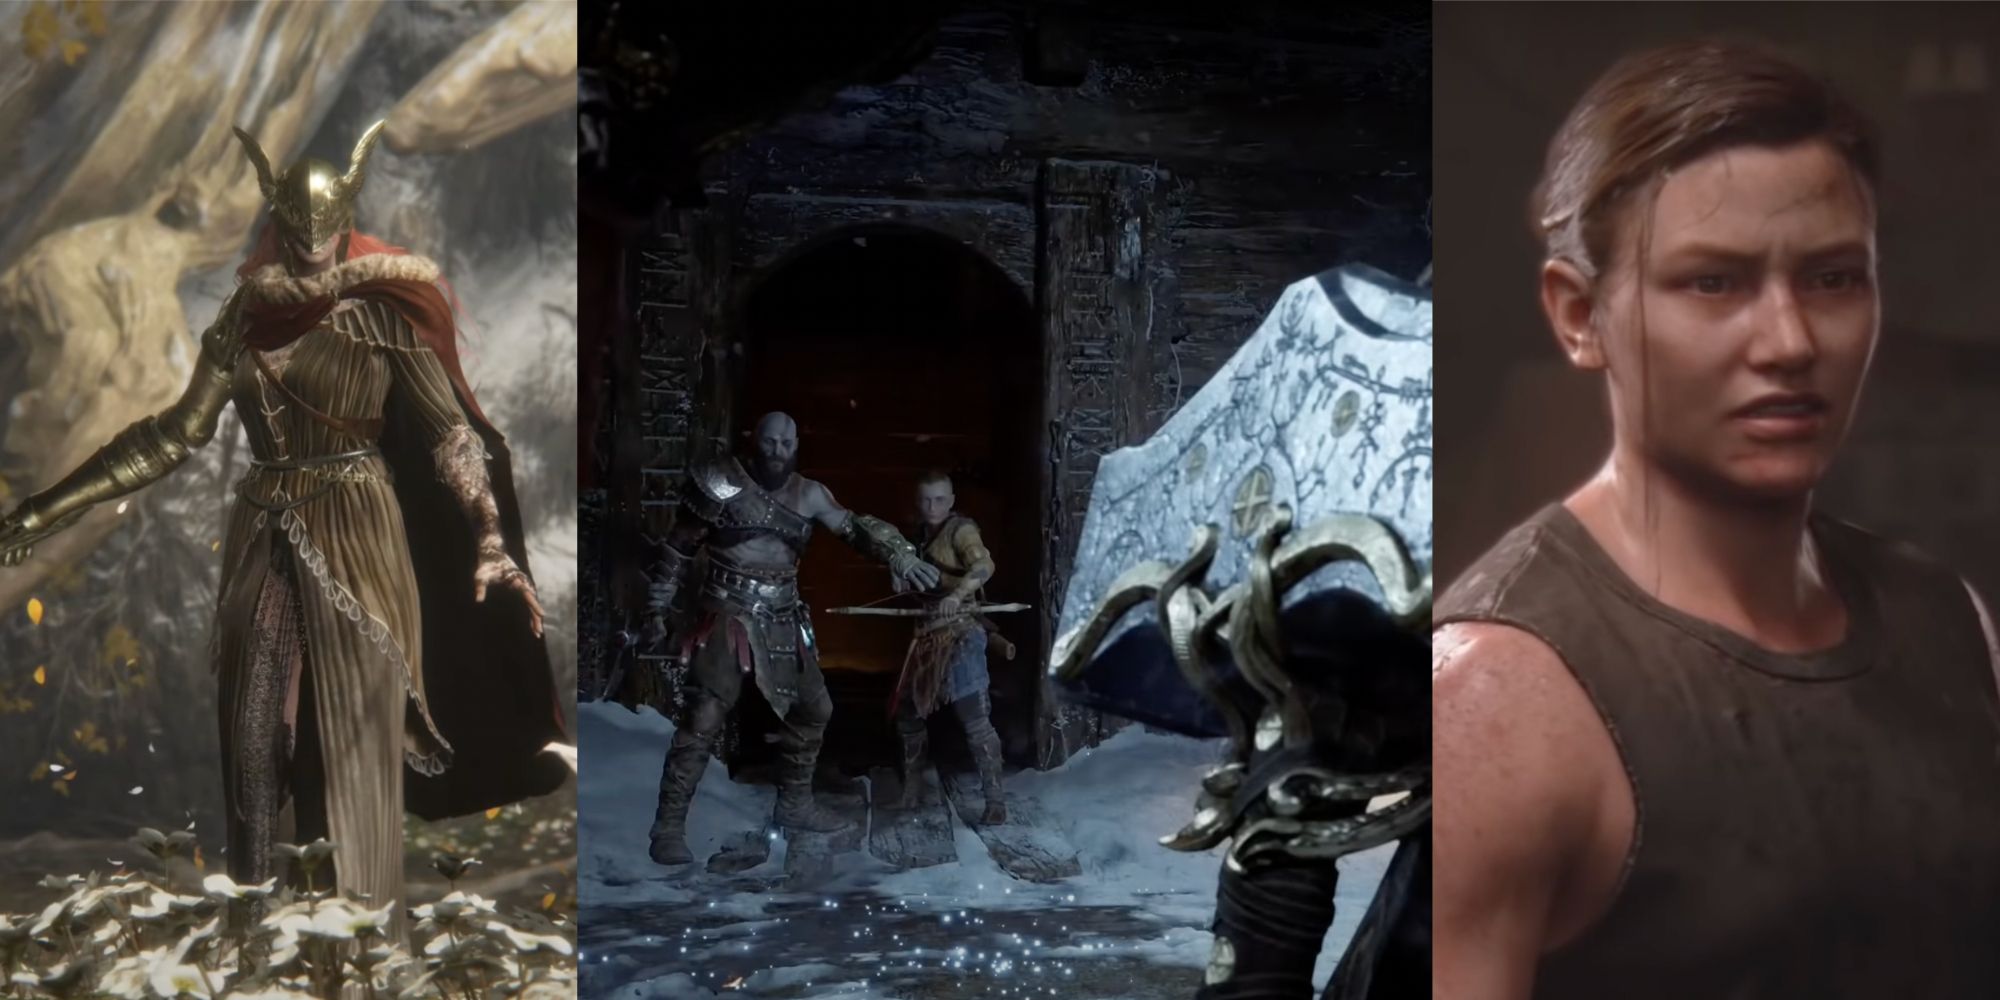 malenia in elden ring, kratos and atreus facing thor in god of war ragnarok, abby in the last of us part 2